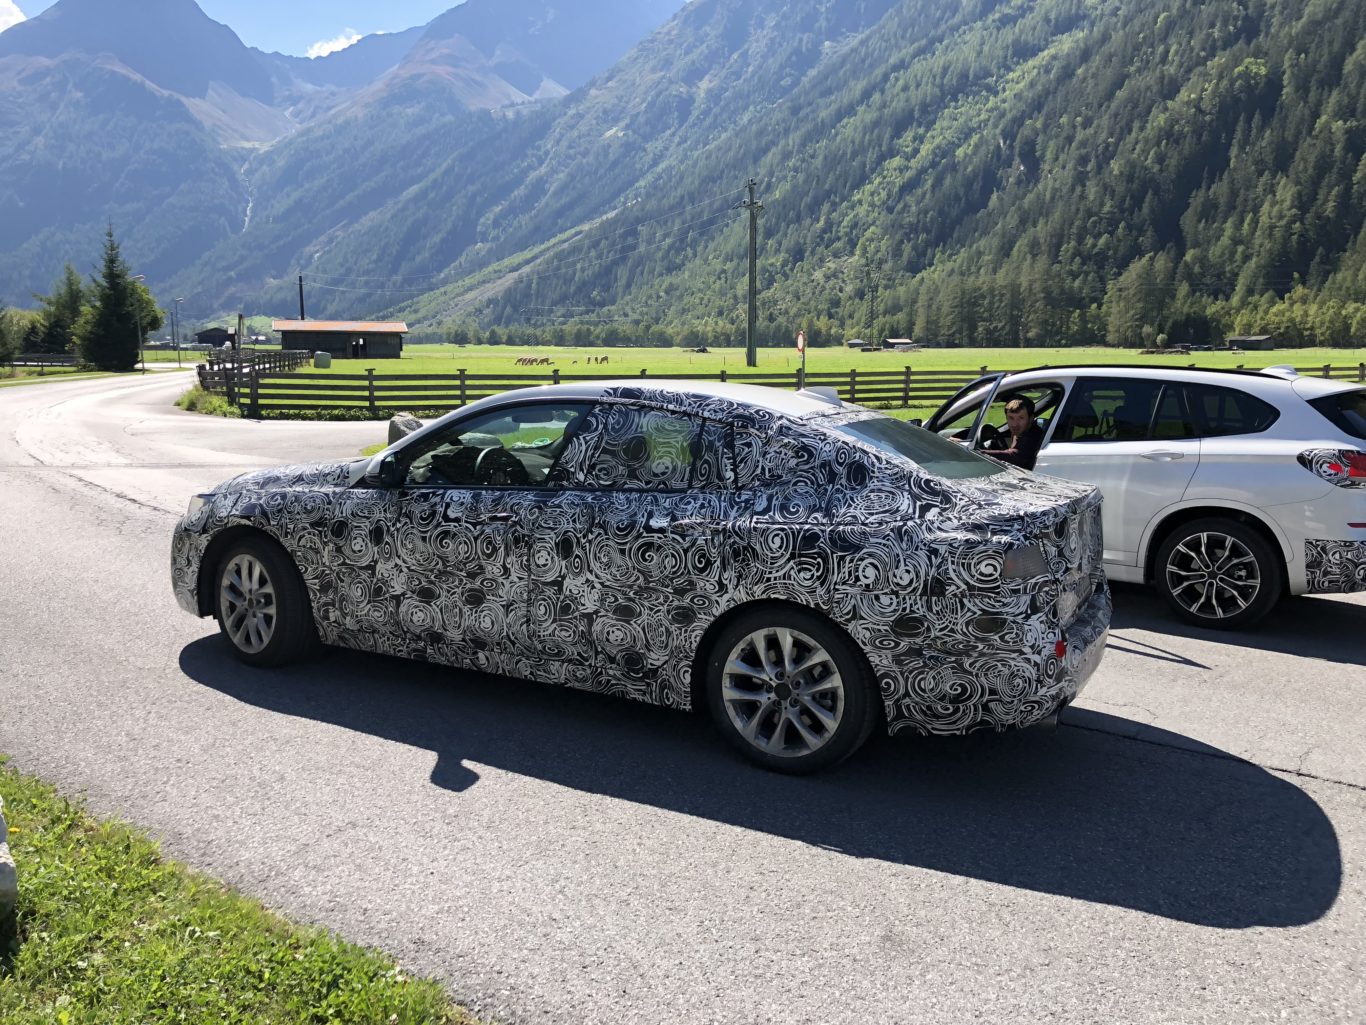 Like the 1 Series, the 2 Series Gran Coupe is expected in dealerships next year